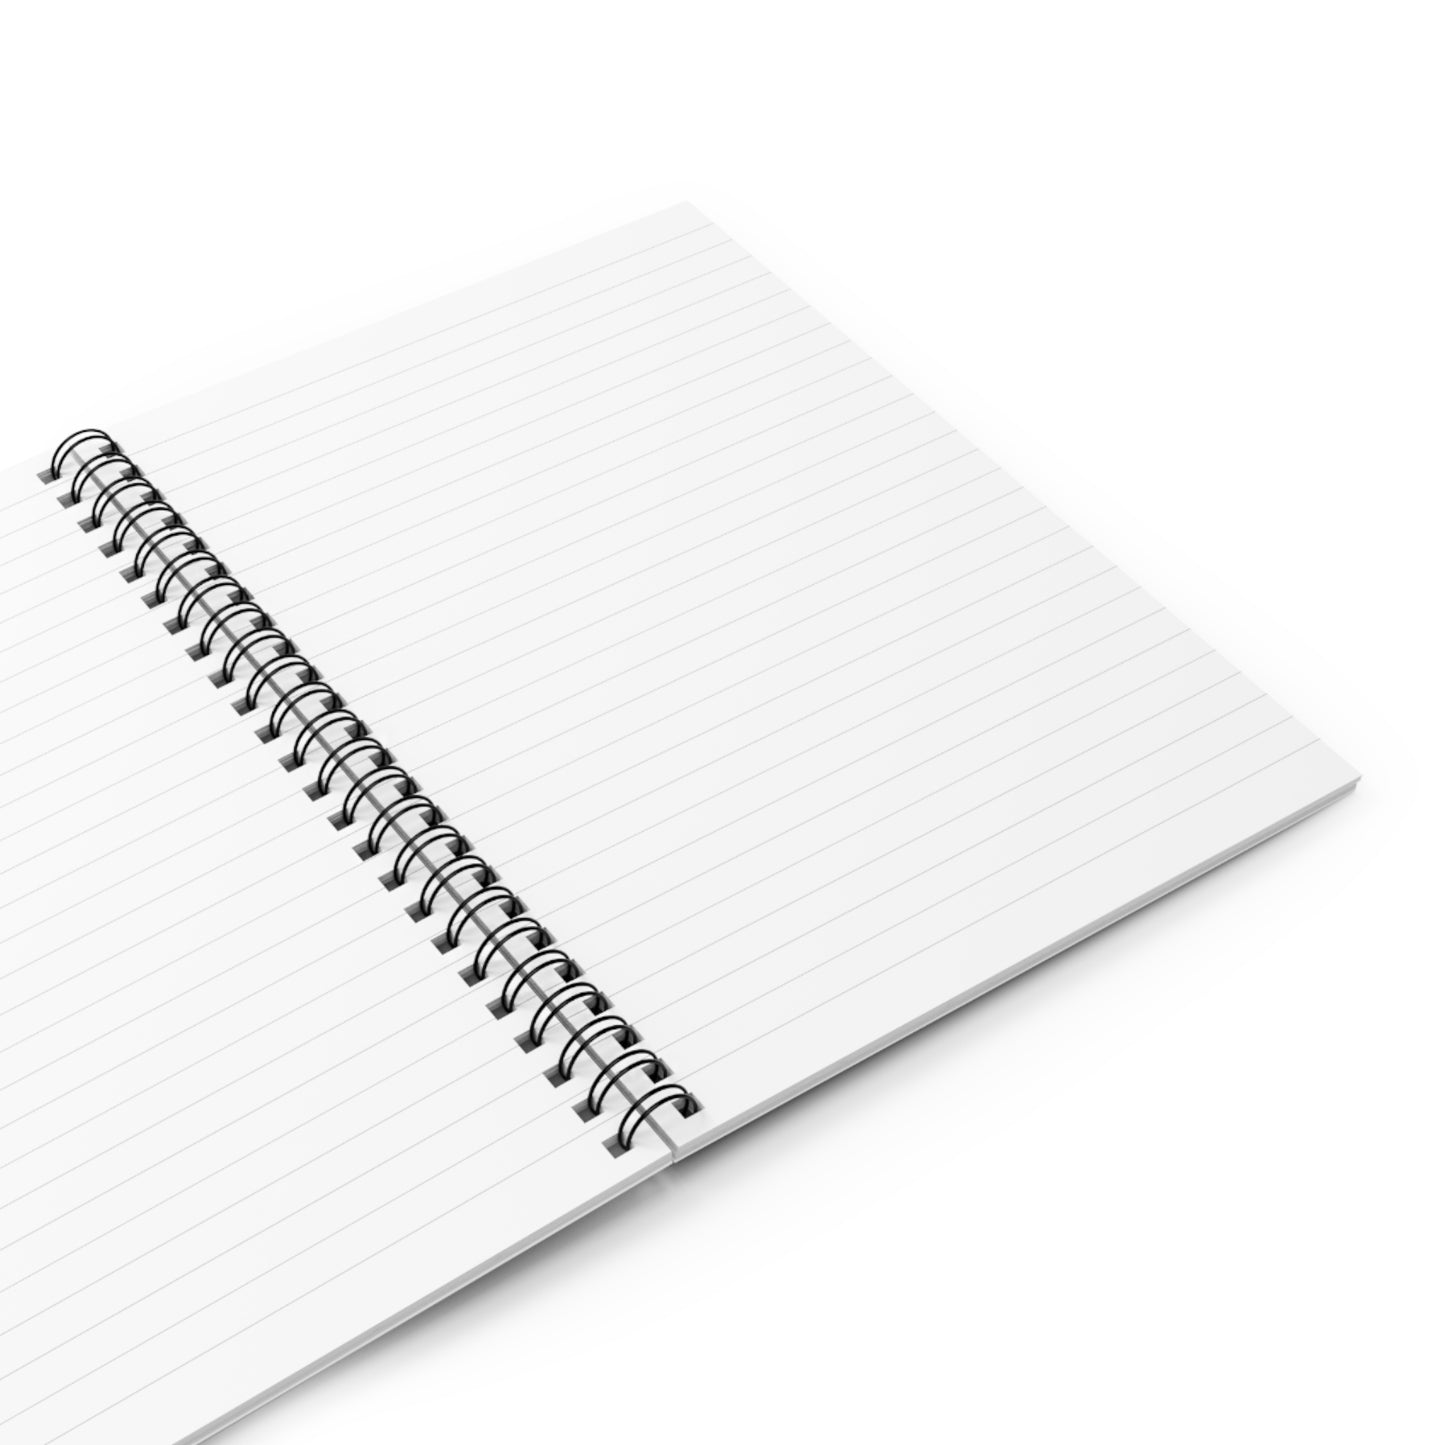 Pixel Five-Point Stars Spiral Notebook - Ruled Line